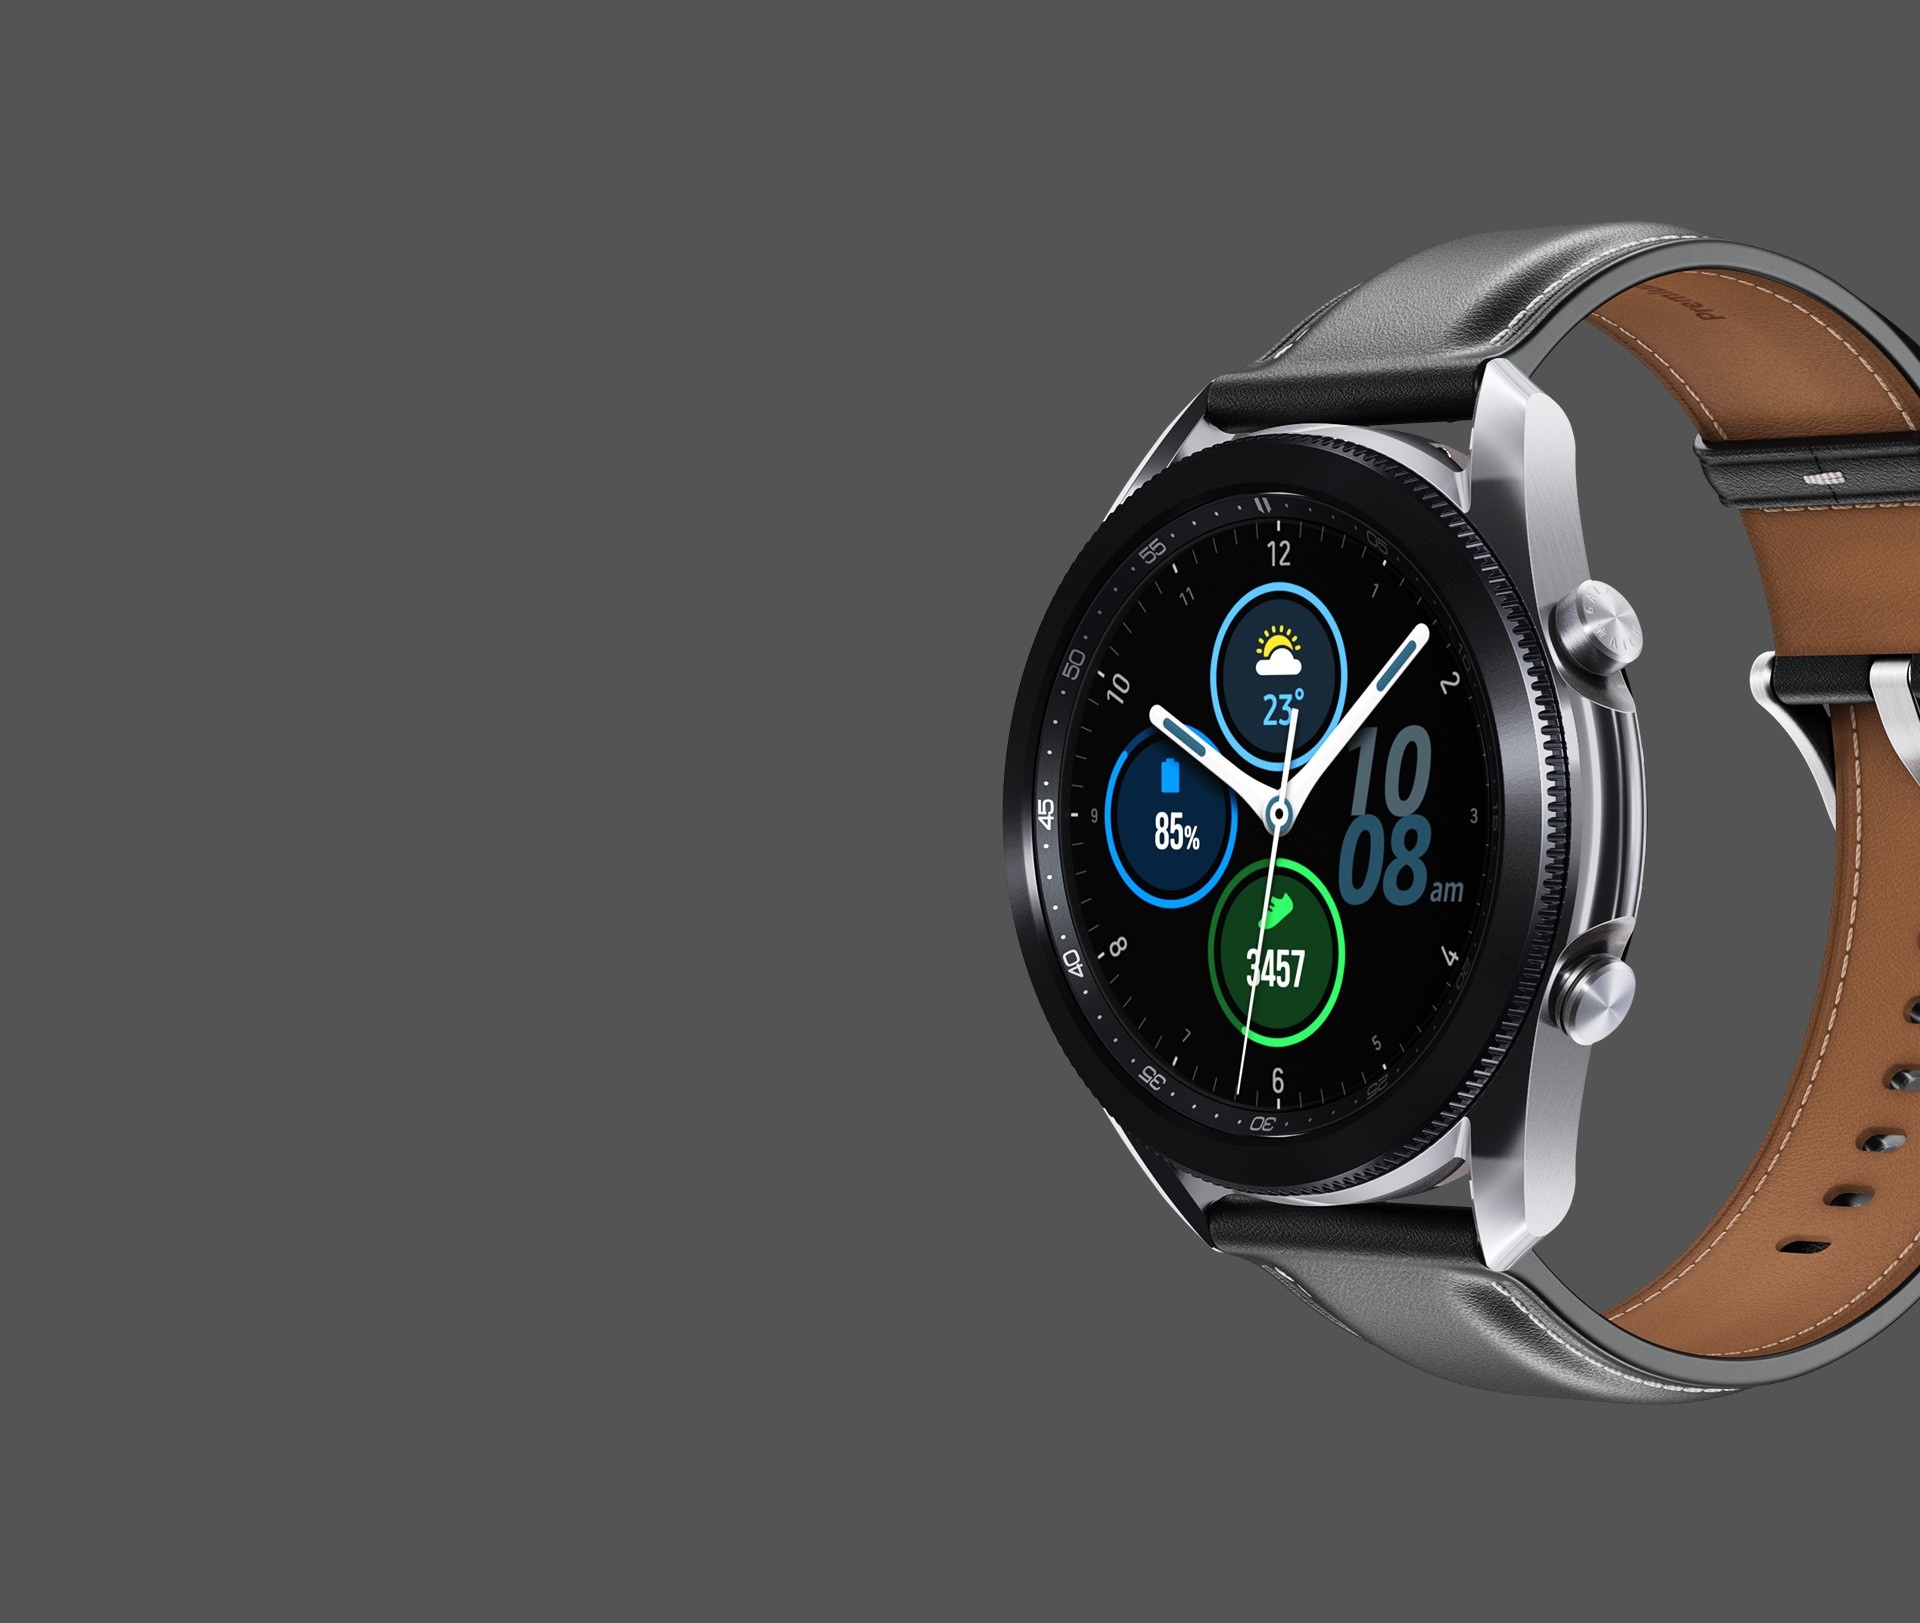 45mm Galaxy Watch3 in Mystic Silver with an Analog Modular Watch Face seen from an angle